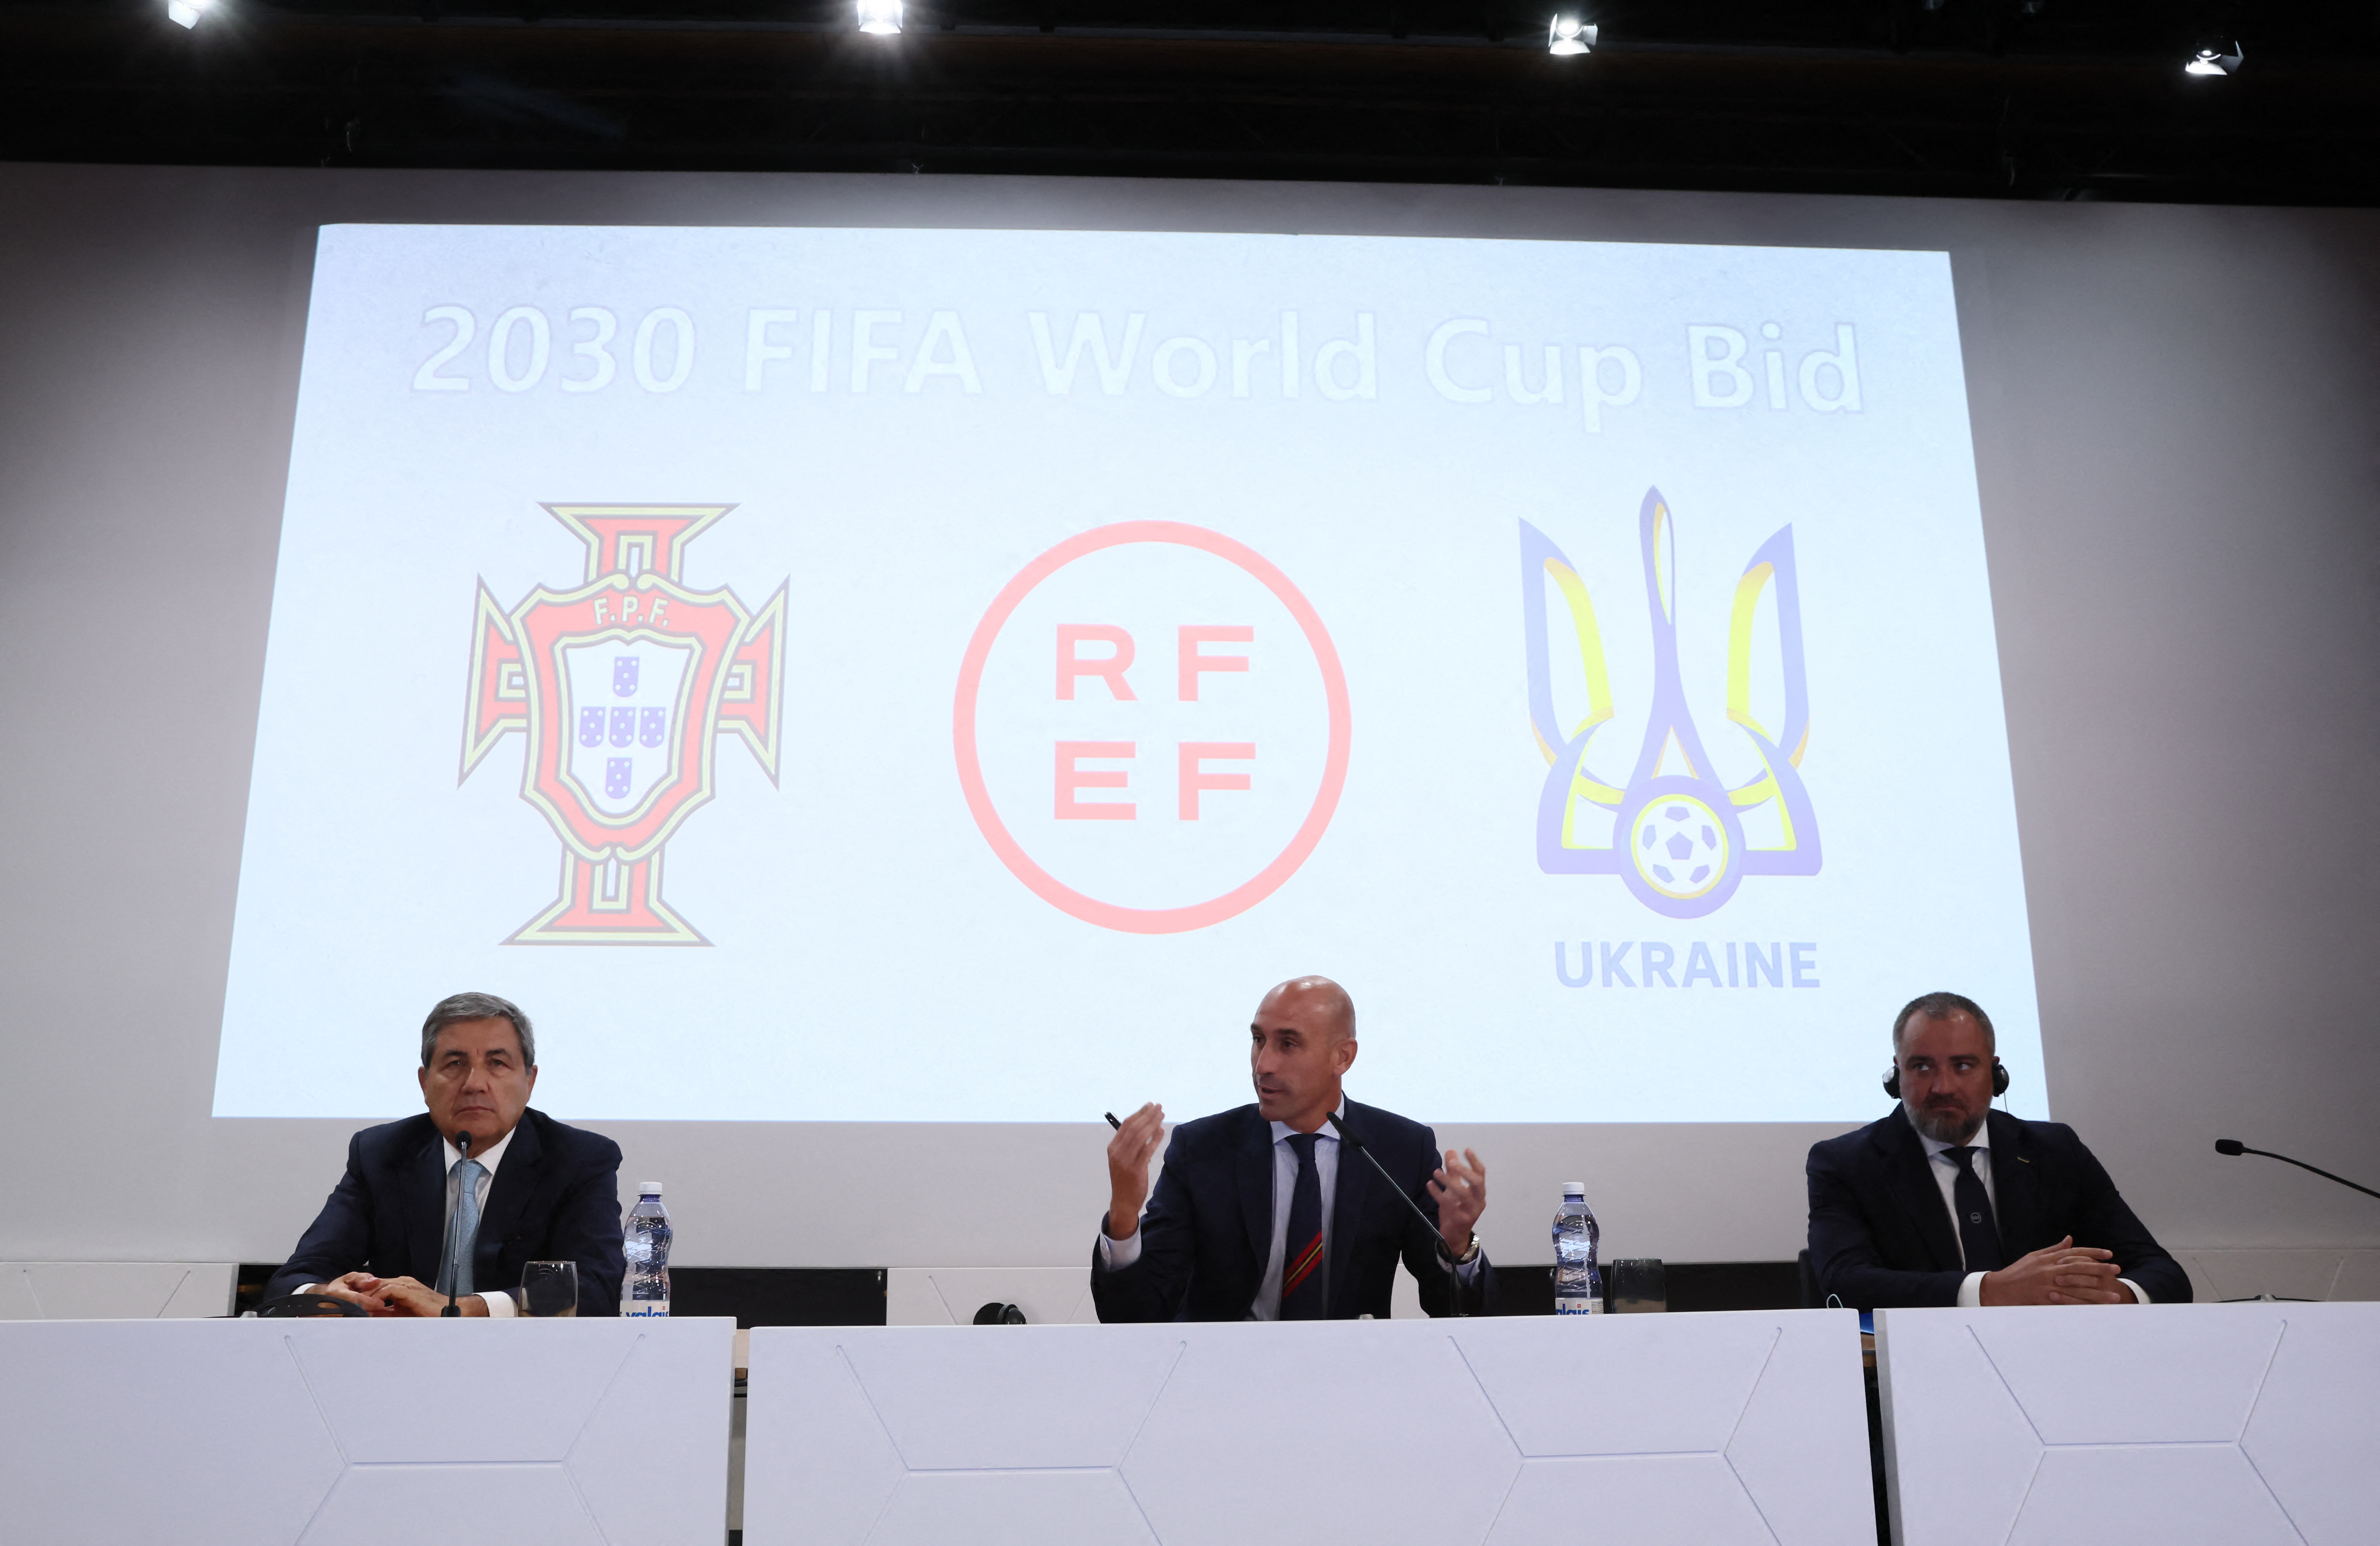 2030 World Cup bid - Portugal, Spain and Ukraine Press Conference